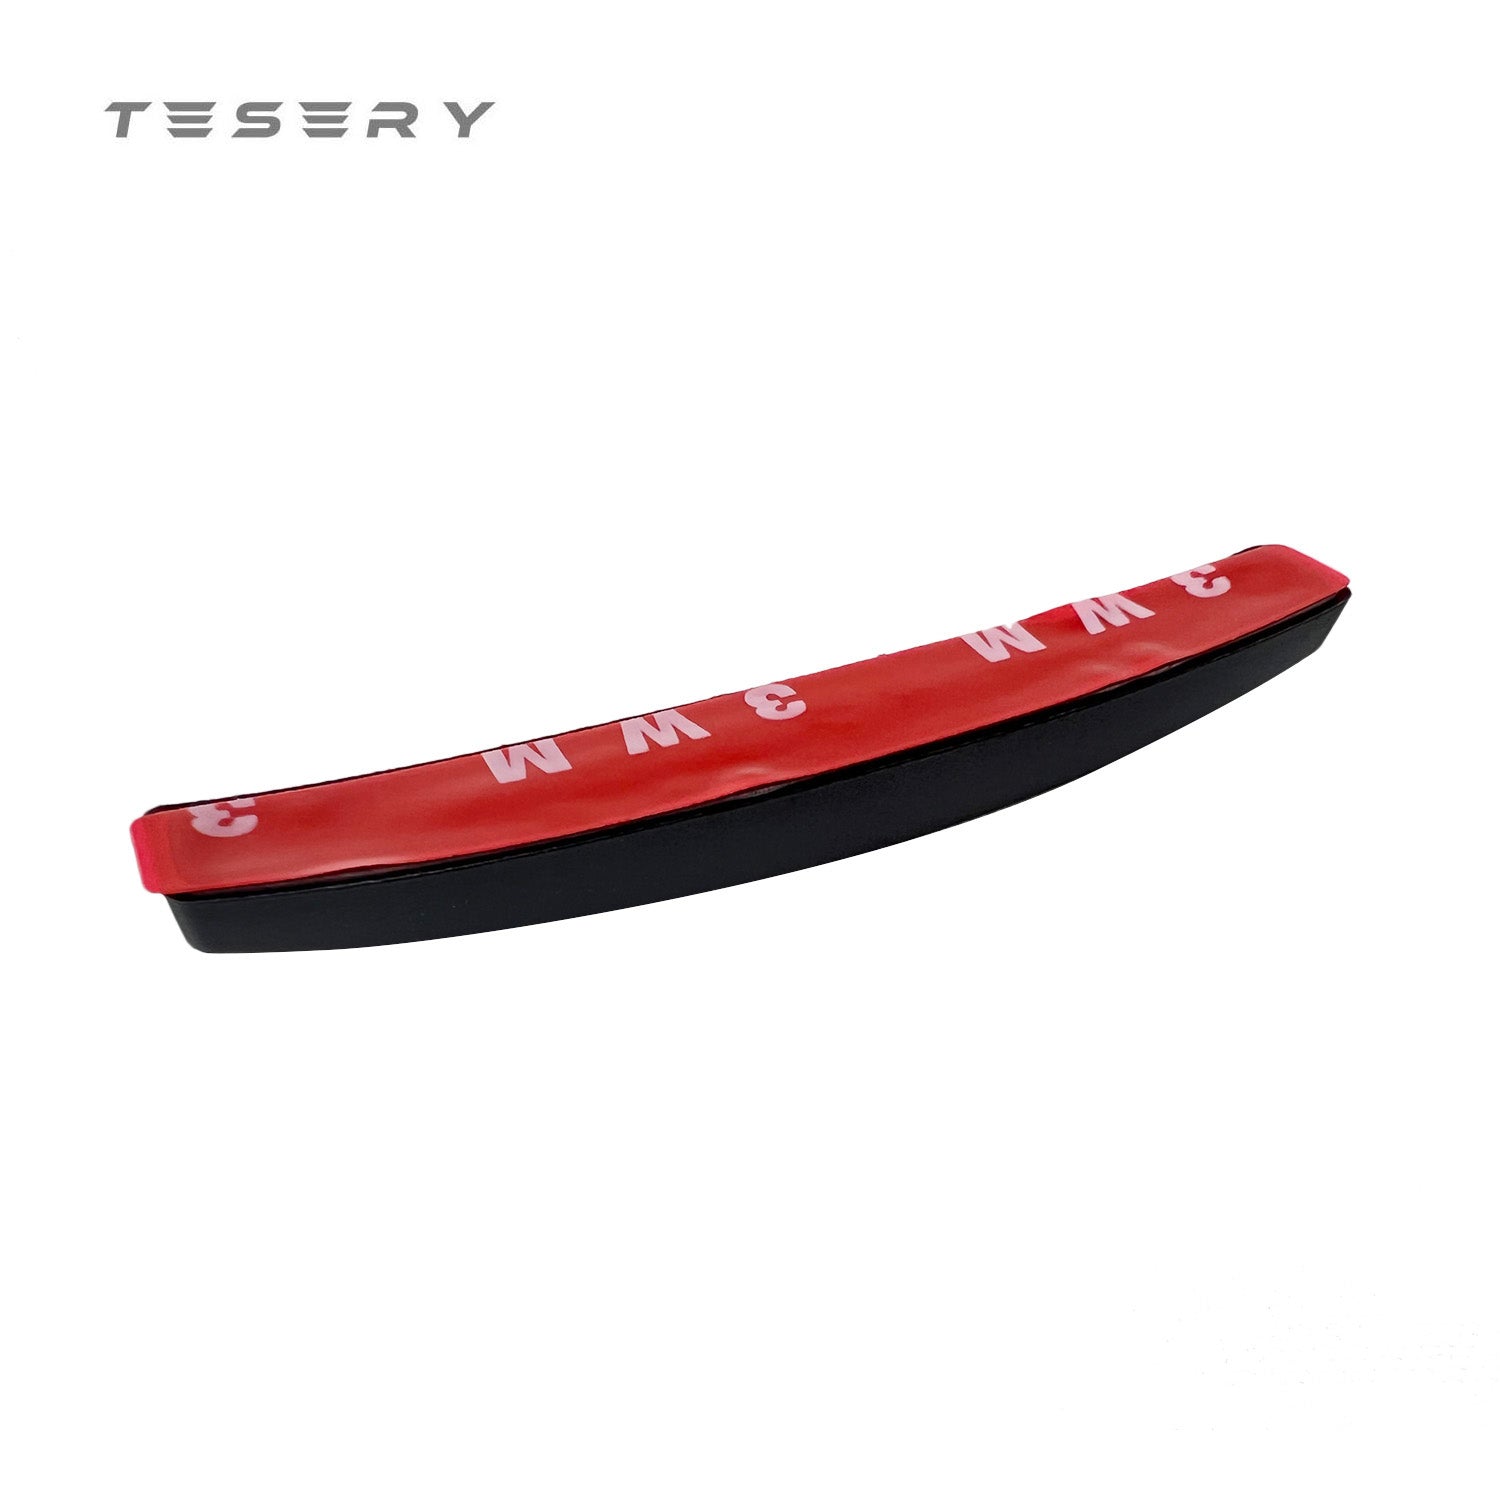 Anti-Scratch Door Edge Guard Suitable for Model 3/Y/X/S - Tesery Official Store